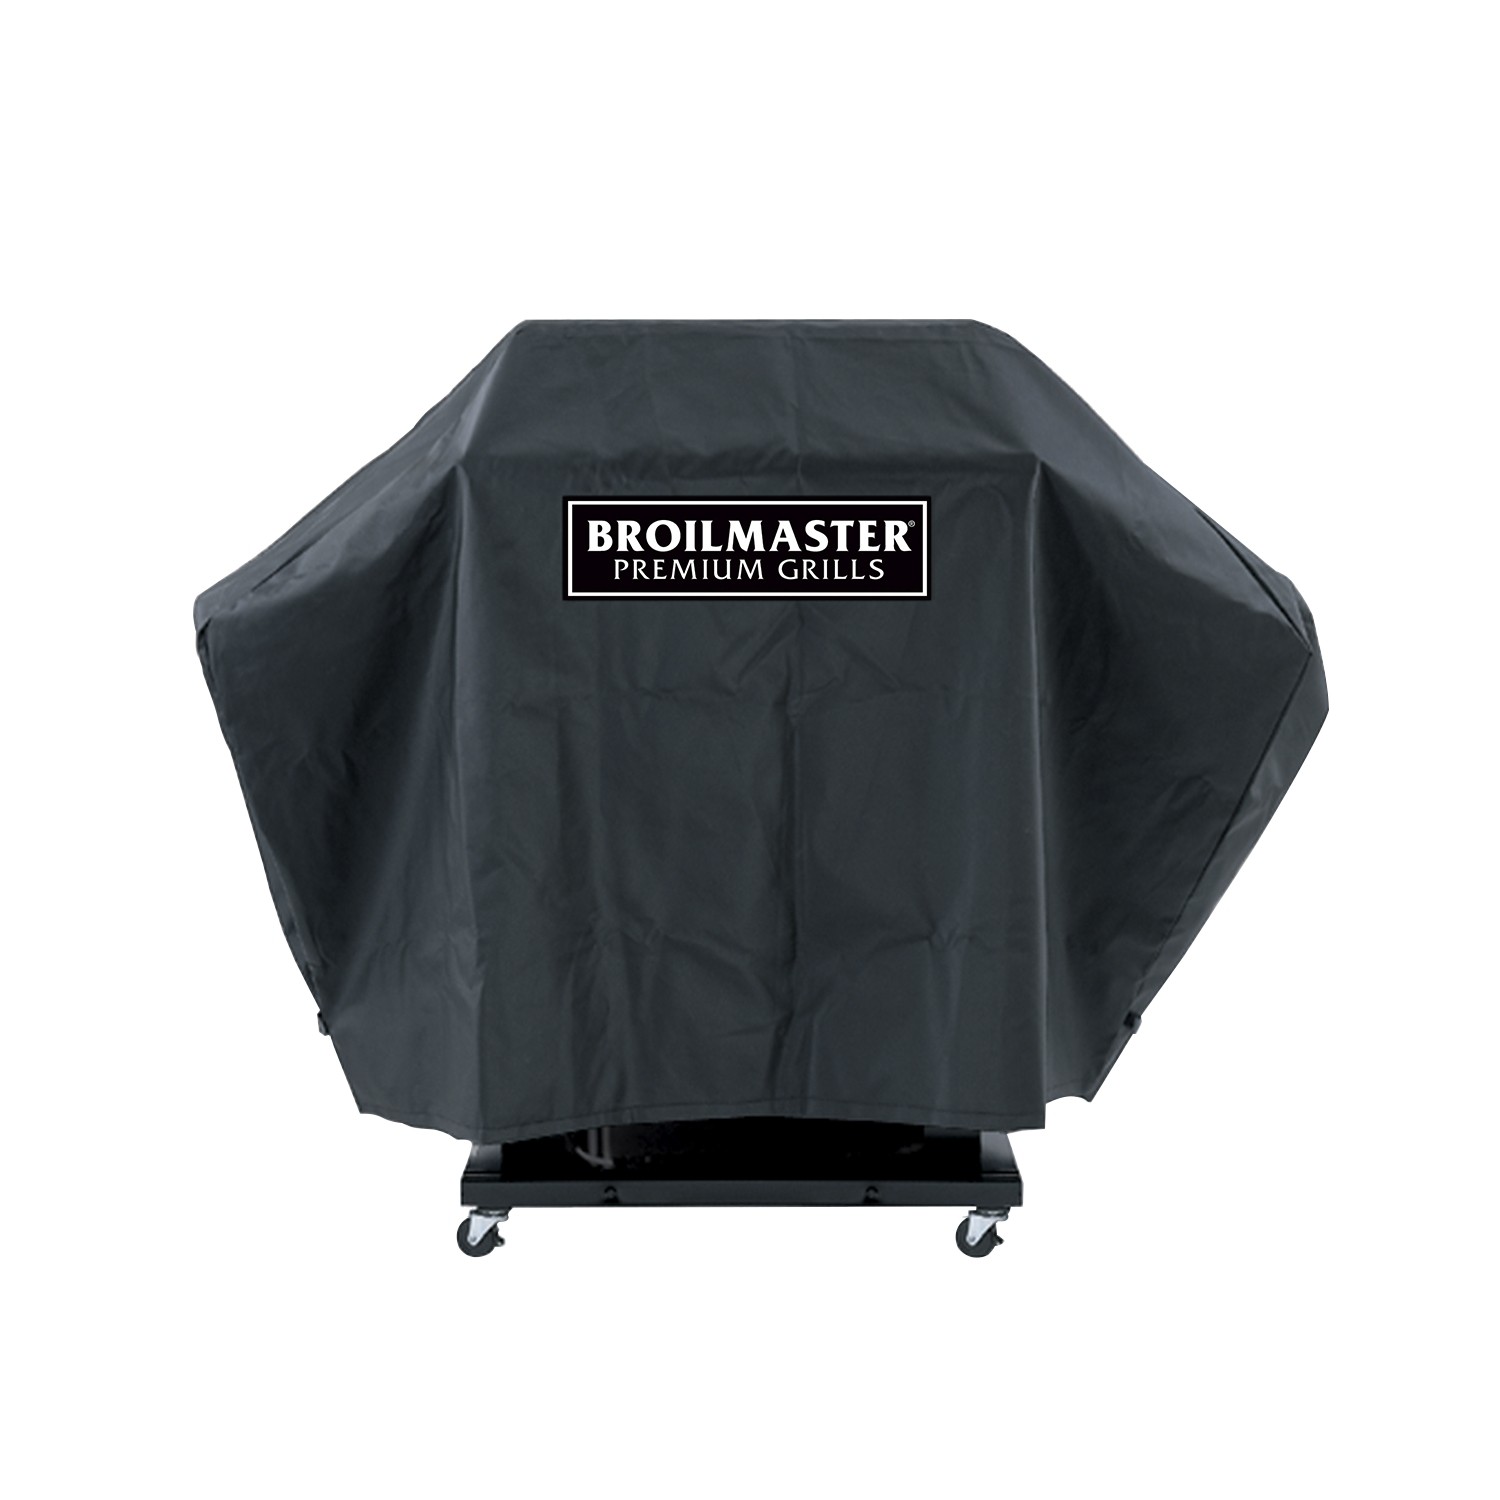 BROILMASTER DPA110 FULL LENGTH COVER FOR BROILMASTER GRILL WITH 2 SIDE SHELVES - BLACK